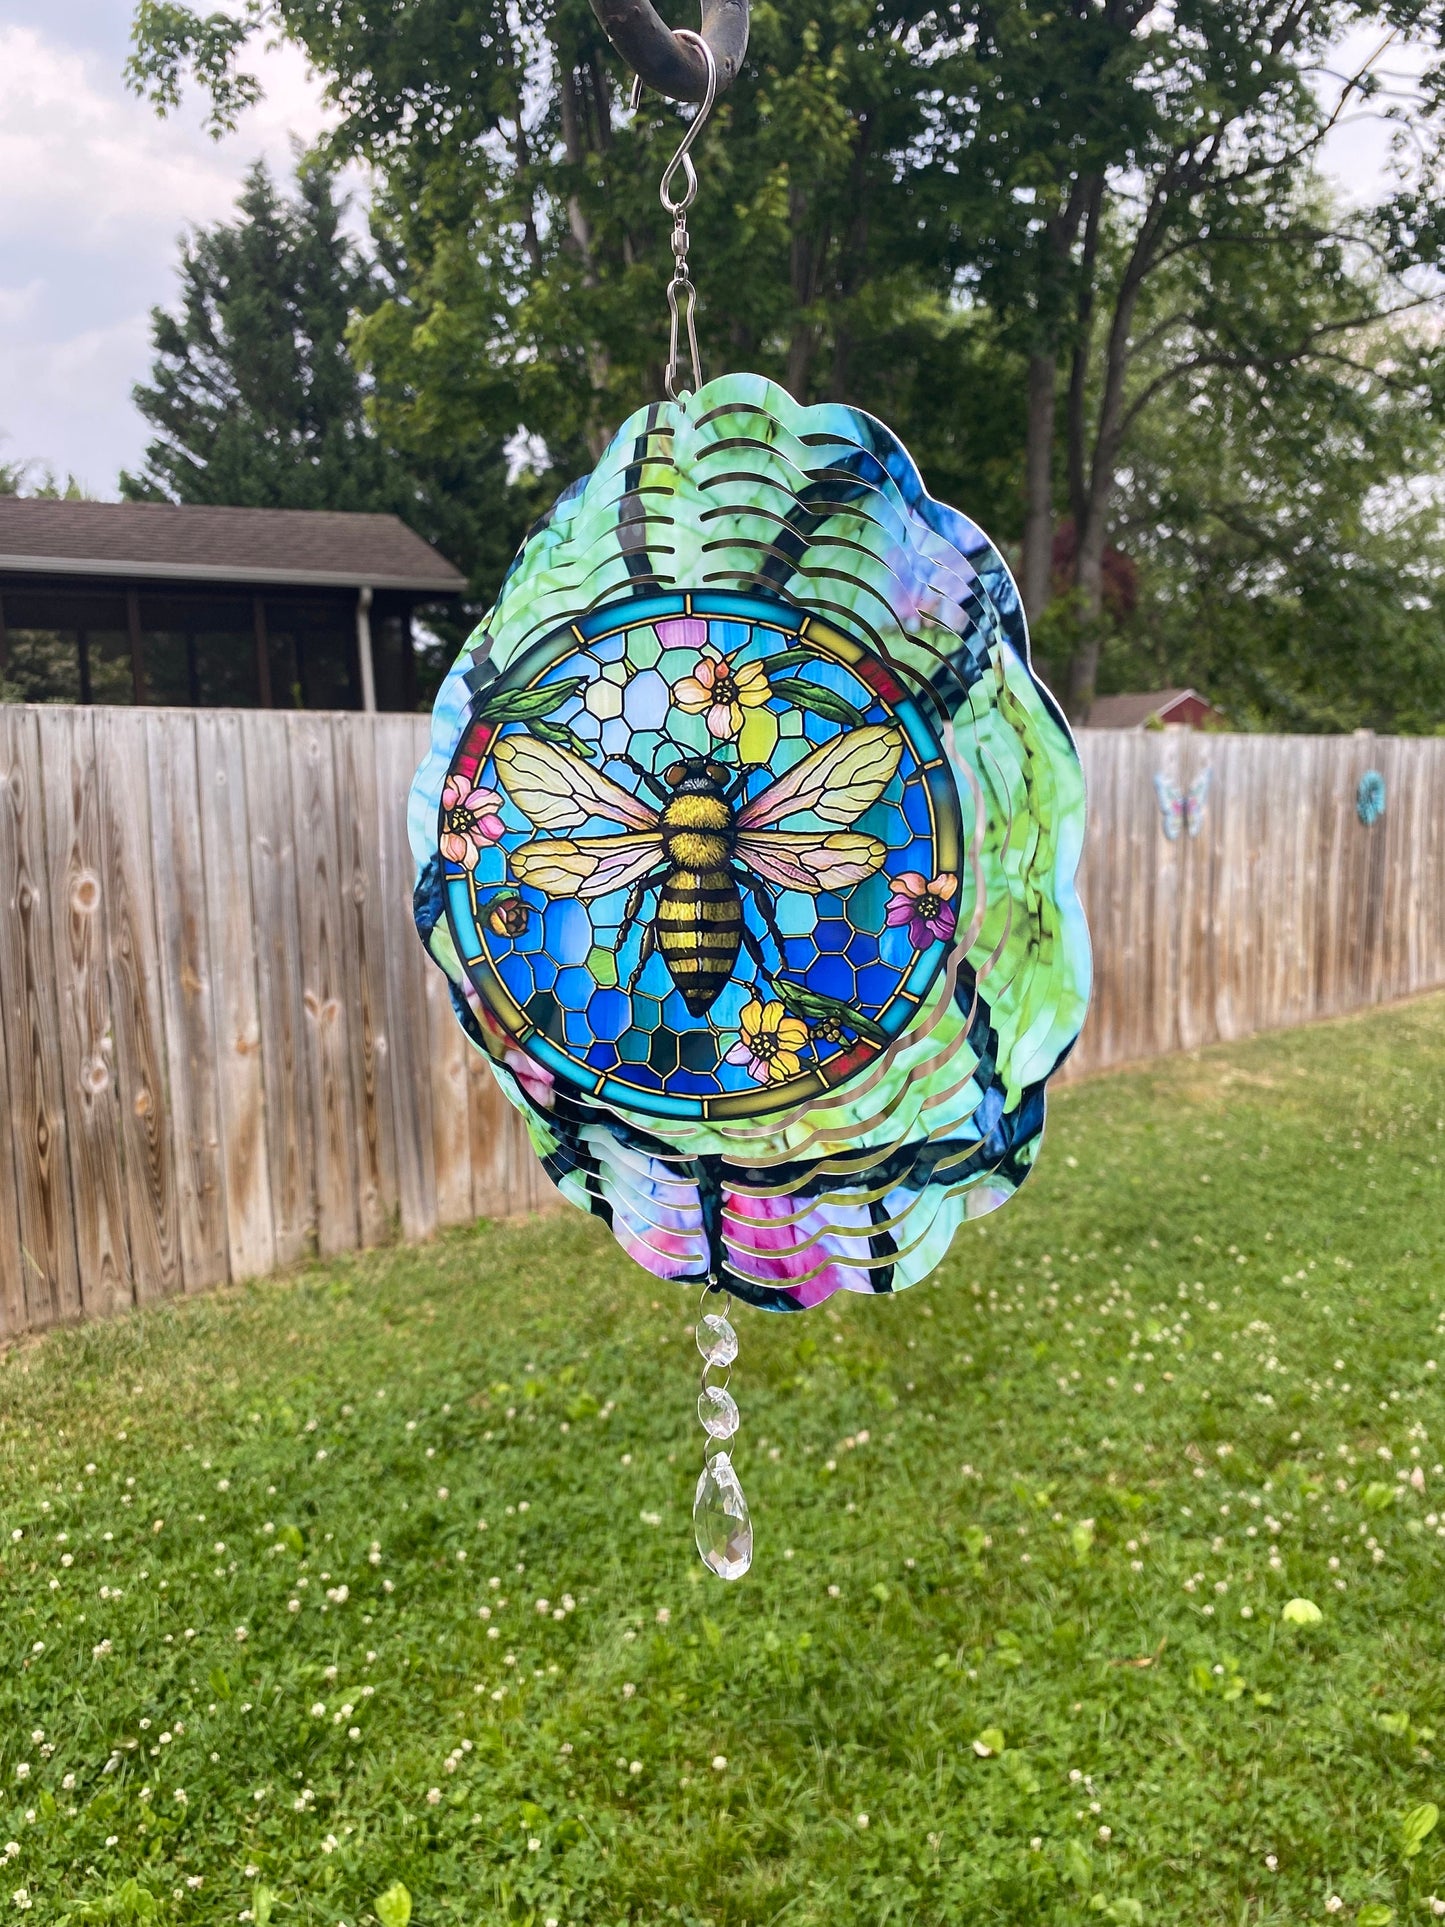 Honey Bee Wind Spinner, Hanging Stained Glass Effect Bee Wind Spinner, Bee Gifts, Yard Art Metal Honey Bee Wind Sun Catcher